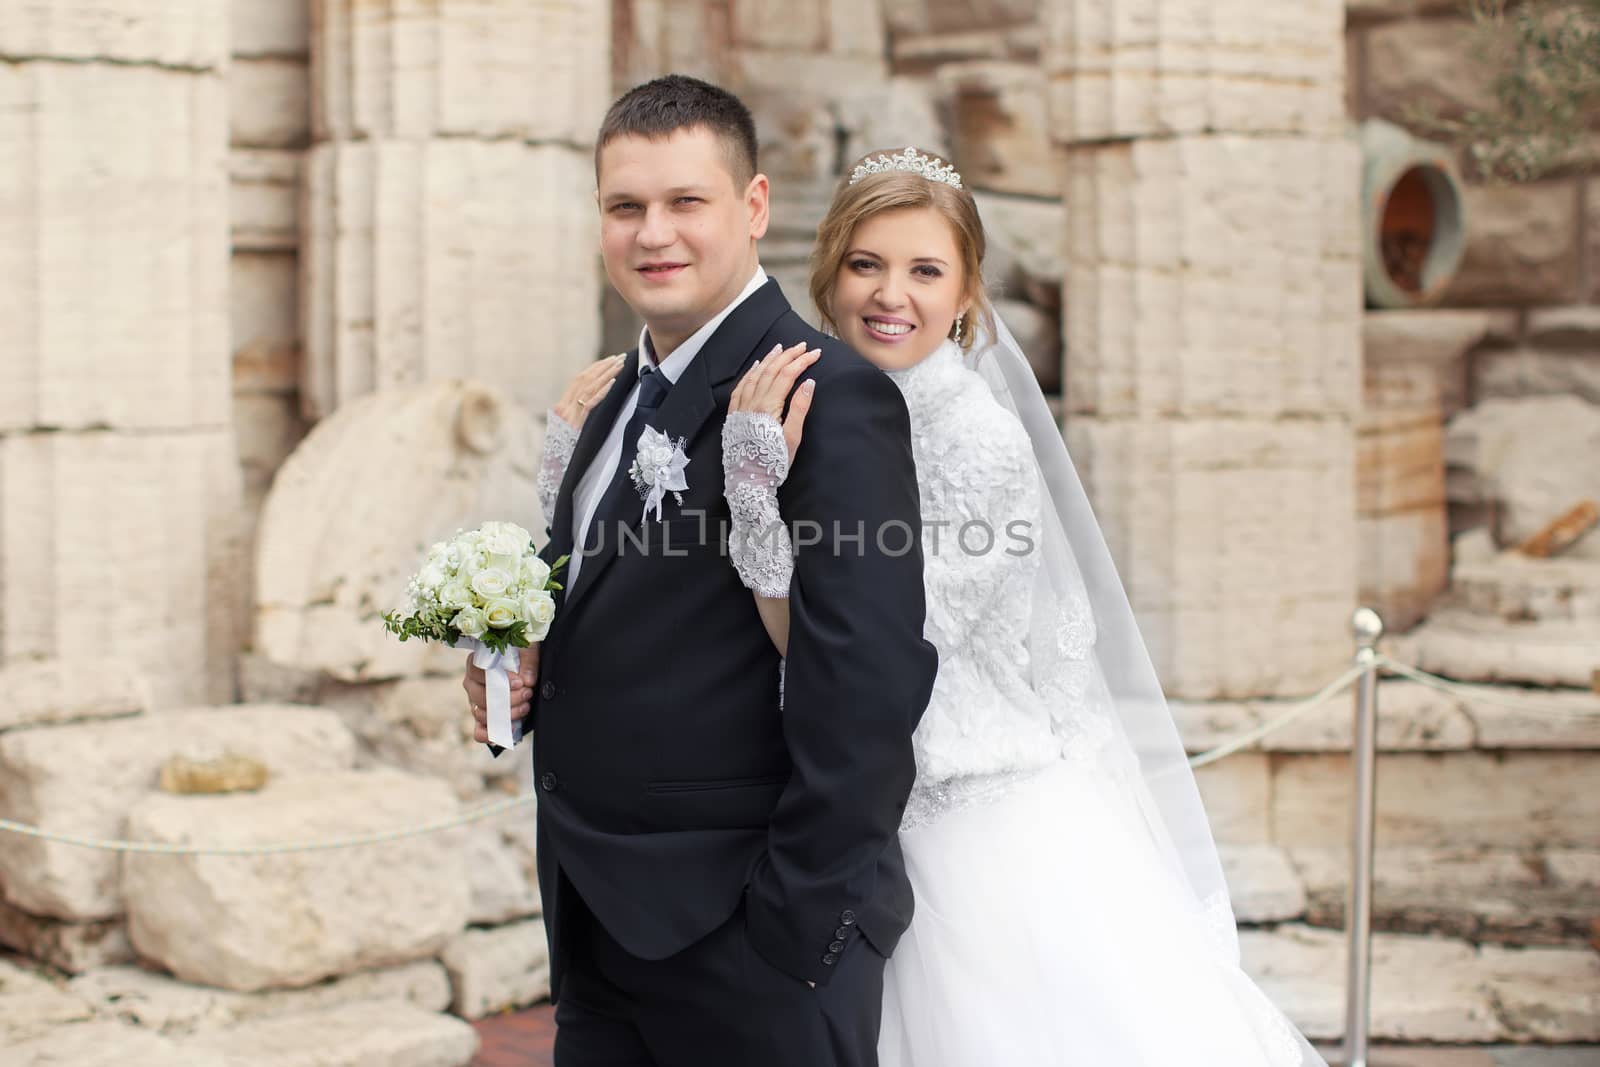 The bride to the groom leaned against the backdrop of a stone wall